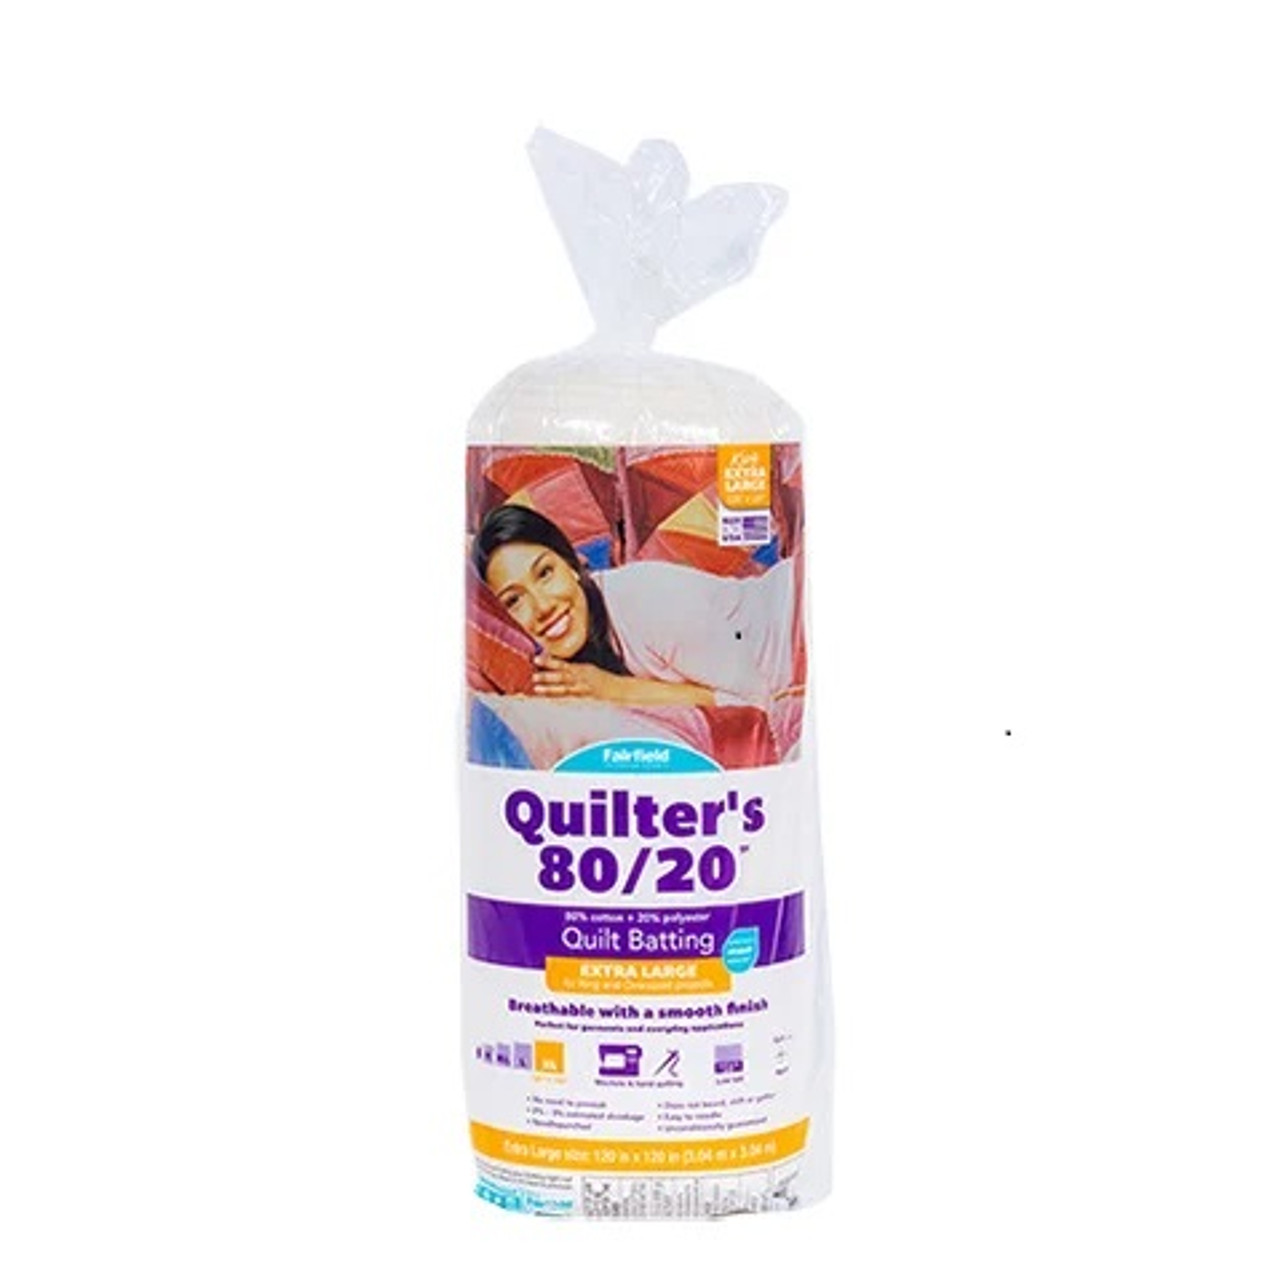 Soft n Crafty Quilters 80/20 Quilt Batting, 80% Cotton/20% Poly